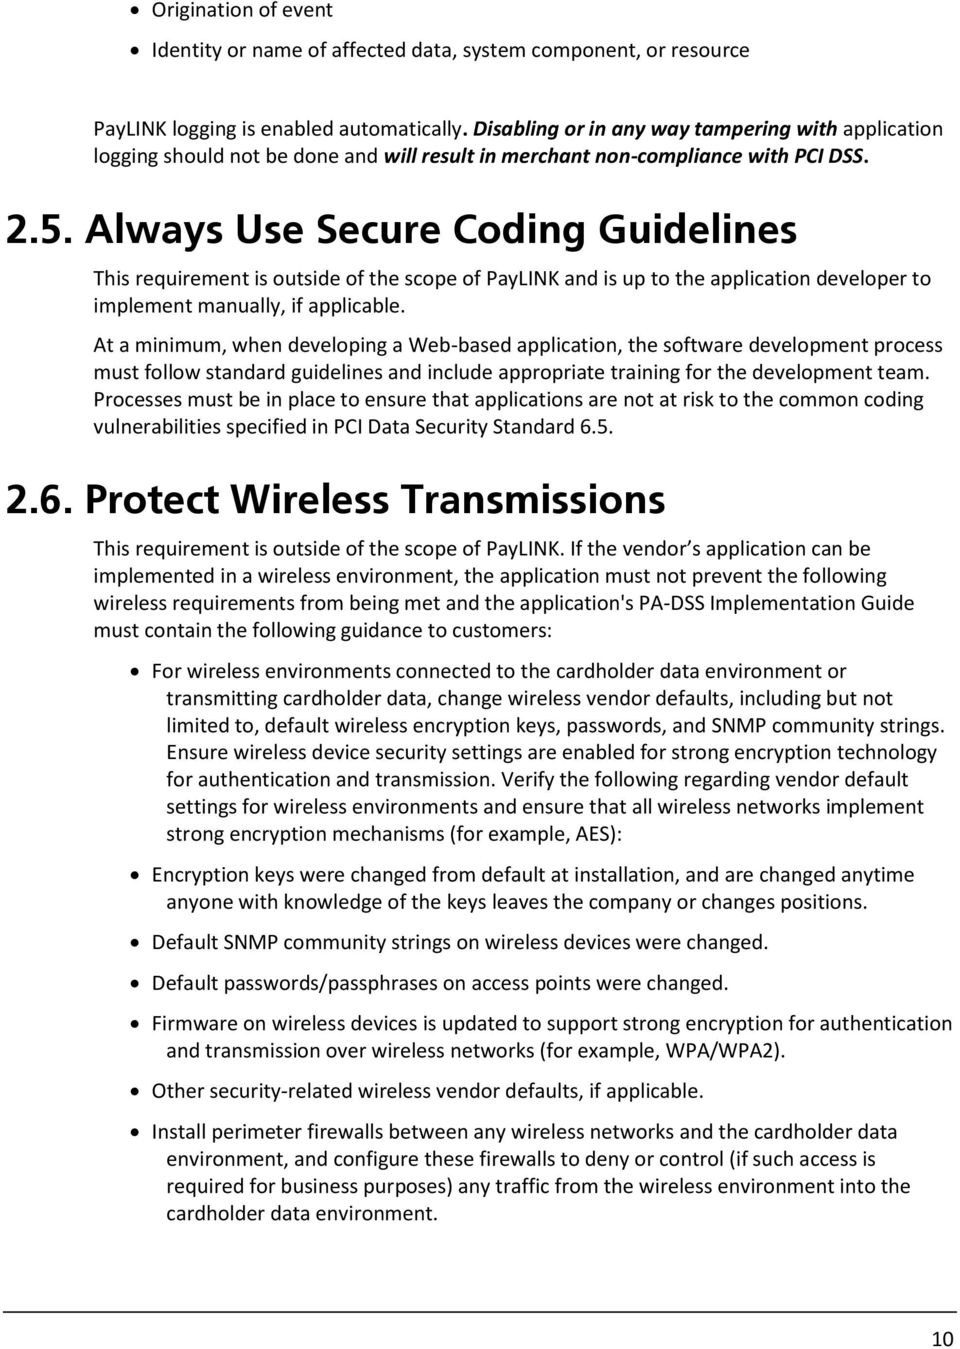 Always Use Secure Coding Guidelines This requirement is outside of the scope of PayLINK and is up to the application developer to implement manually, if applicable.